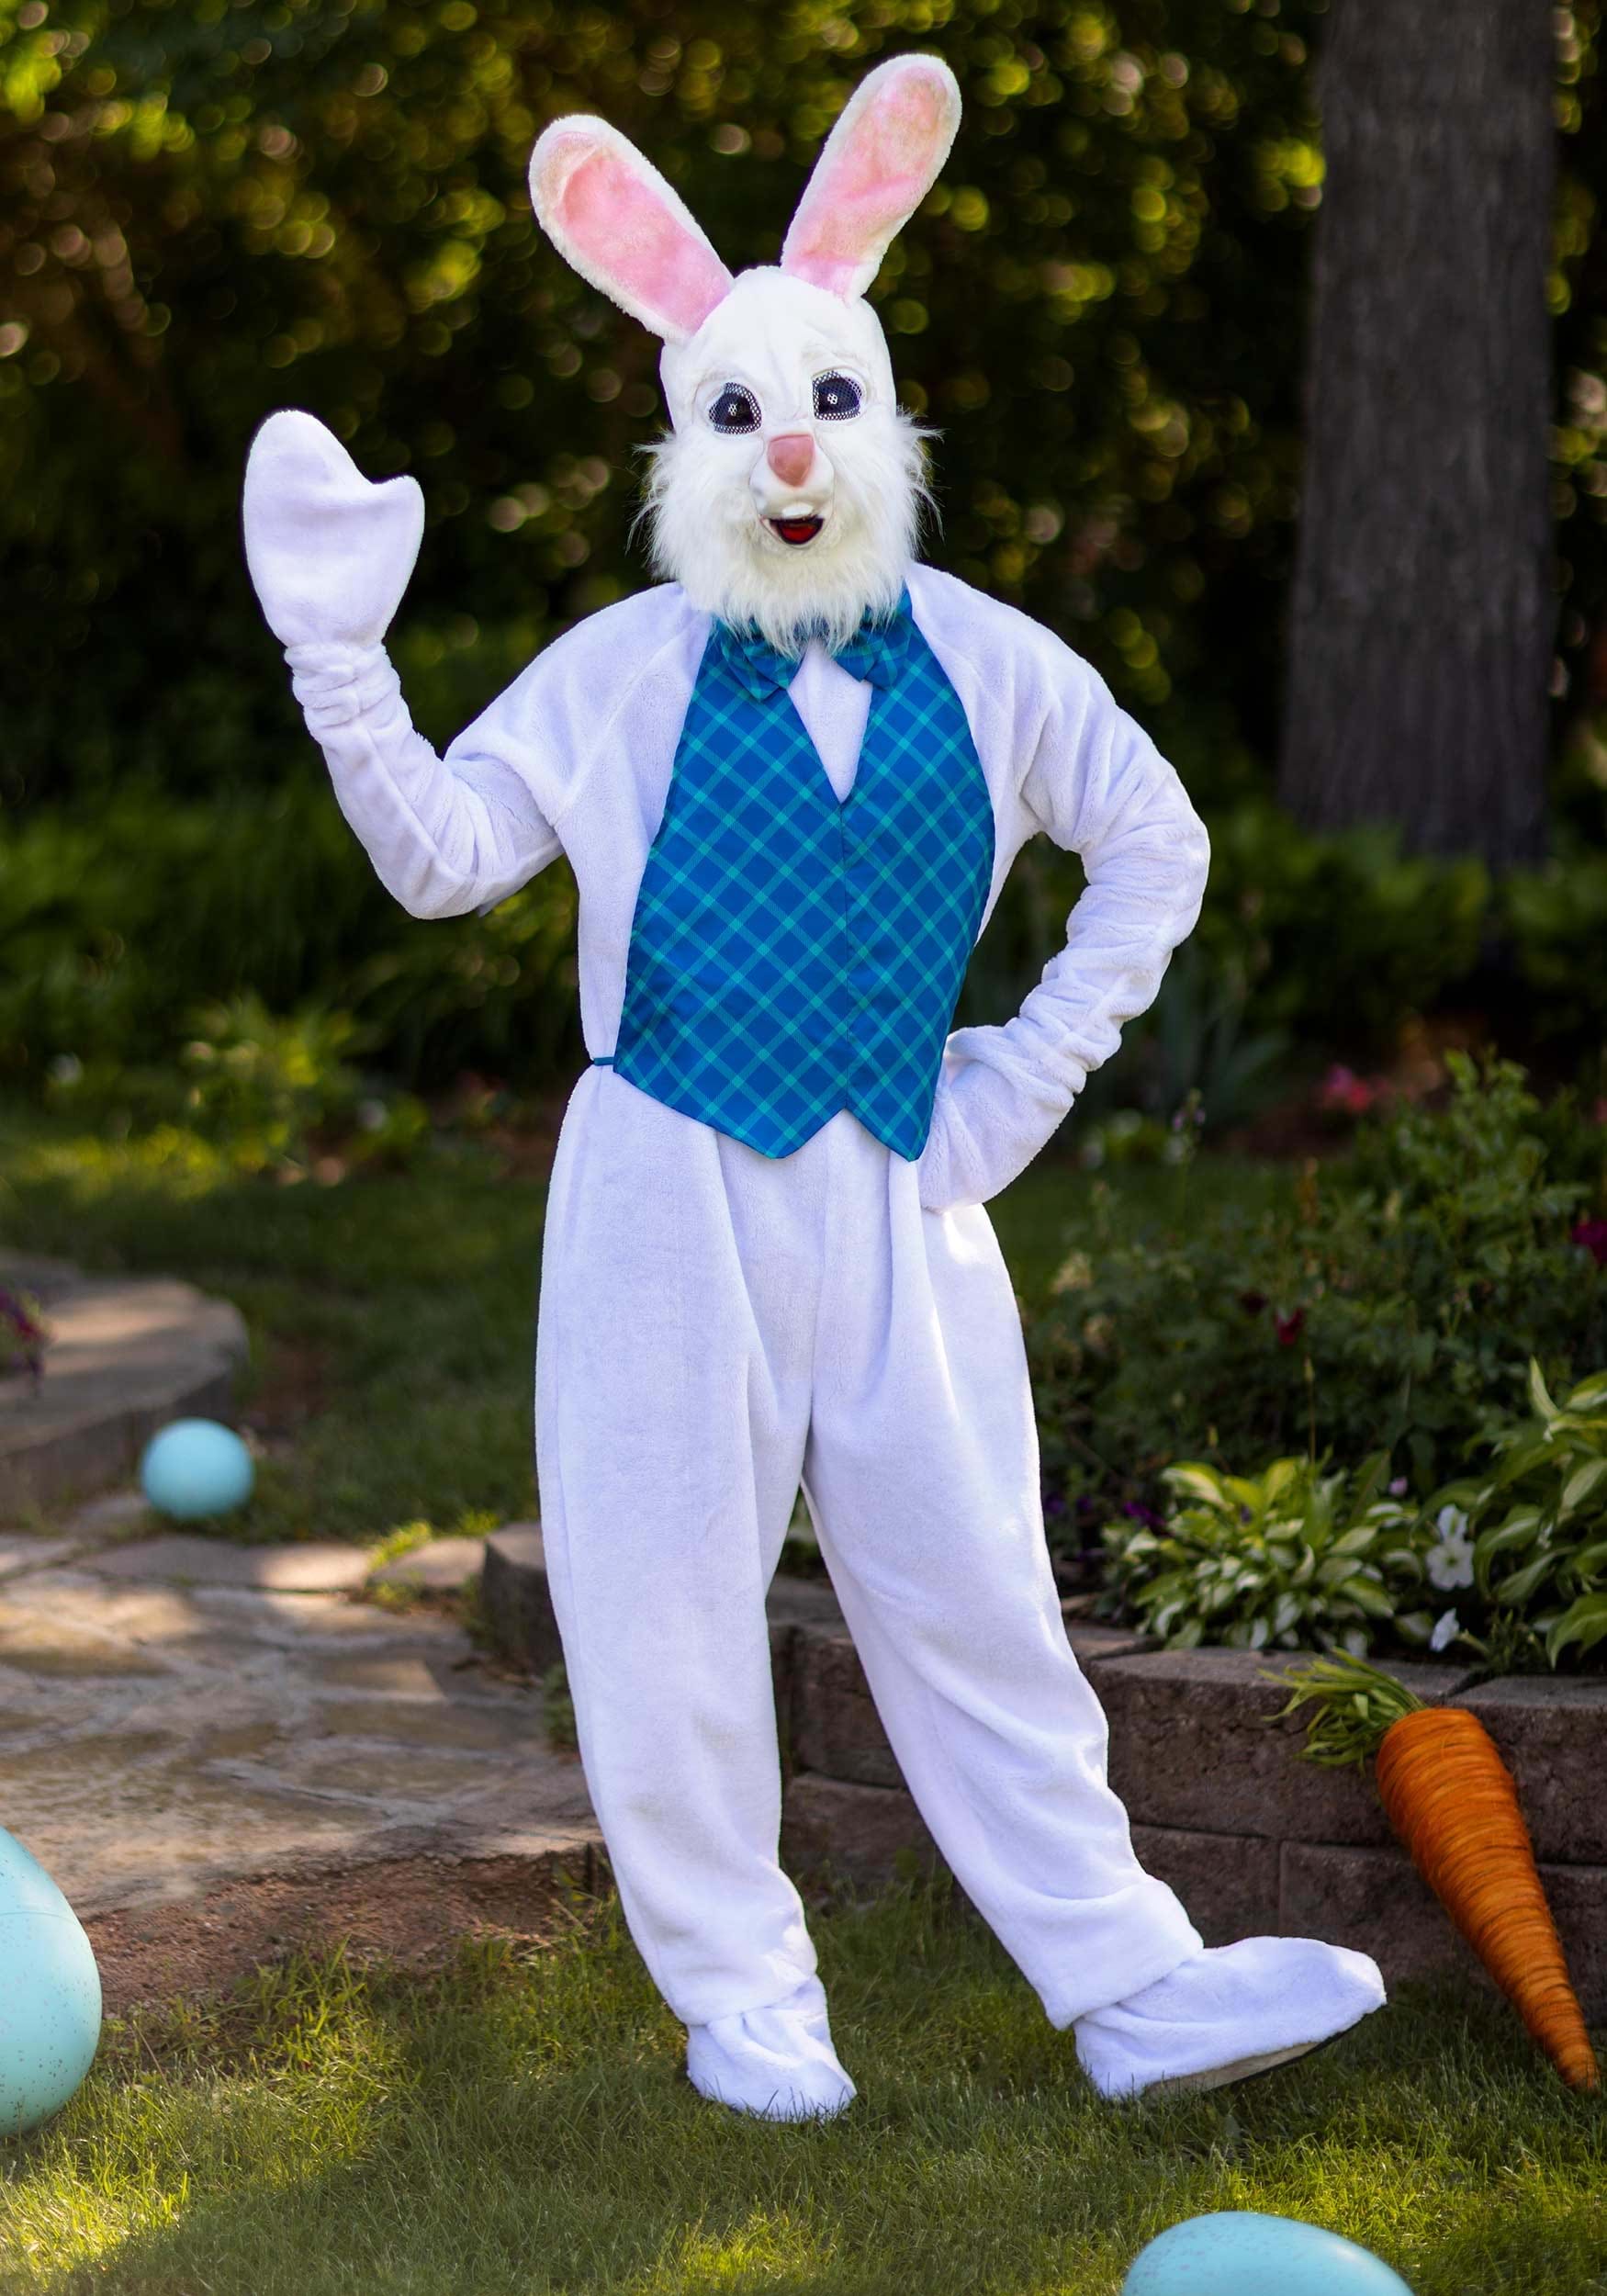 https://images.fun.com/products/33277/1-1/happy-easter-mascot-bunny-costume-update-2.jpg